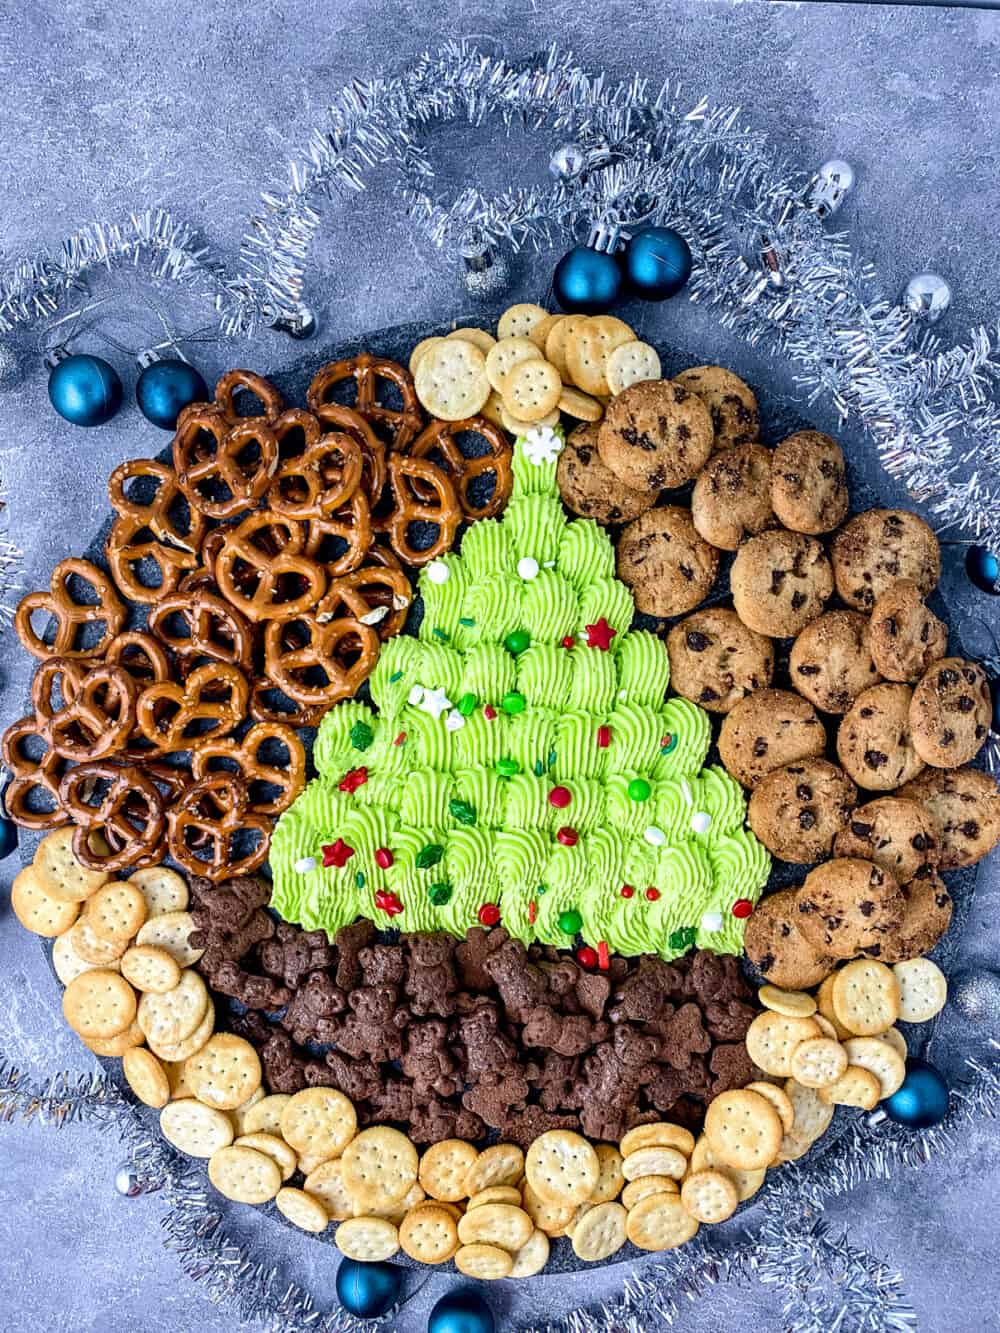 Frosting boards have been all the rave lately, and today we’re hopping on board with the trend! Our Holiday Frosting Board is the epitome of the holiday season and oh-so-sweet!